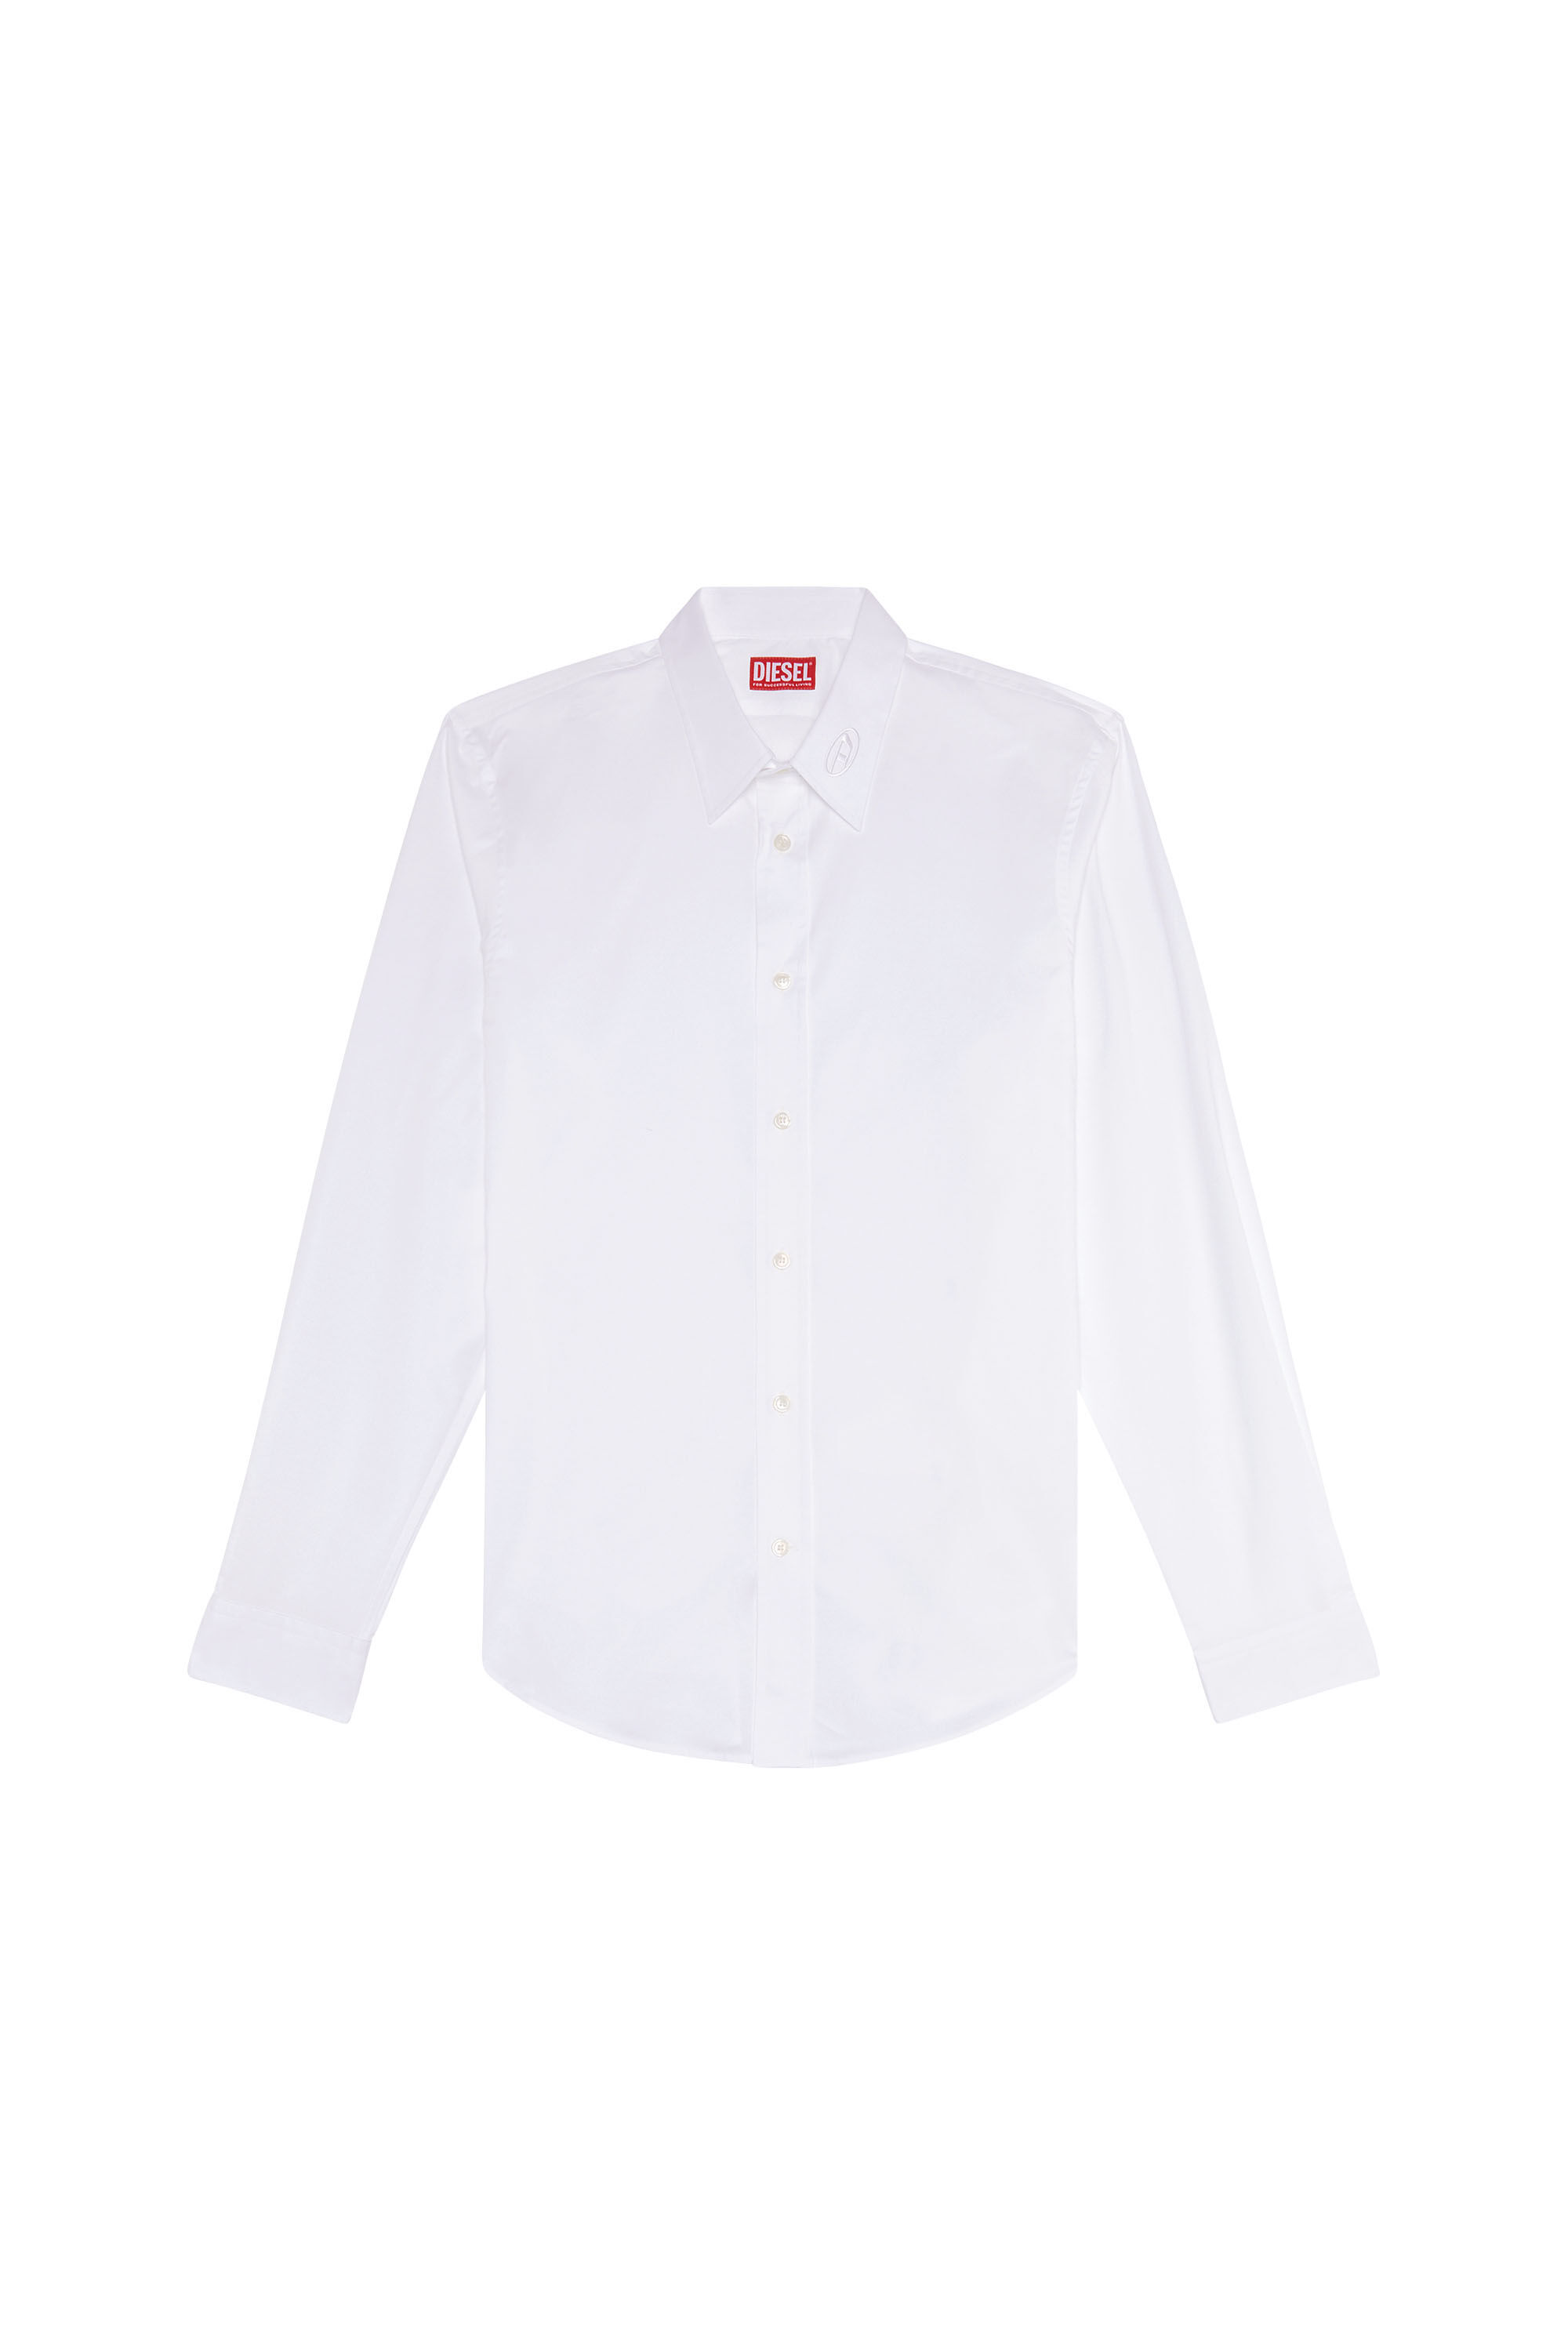 Diesel - S-BENNY-CL, Man Micro-twill shirt with tonal embroidery in White - Image 2